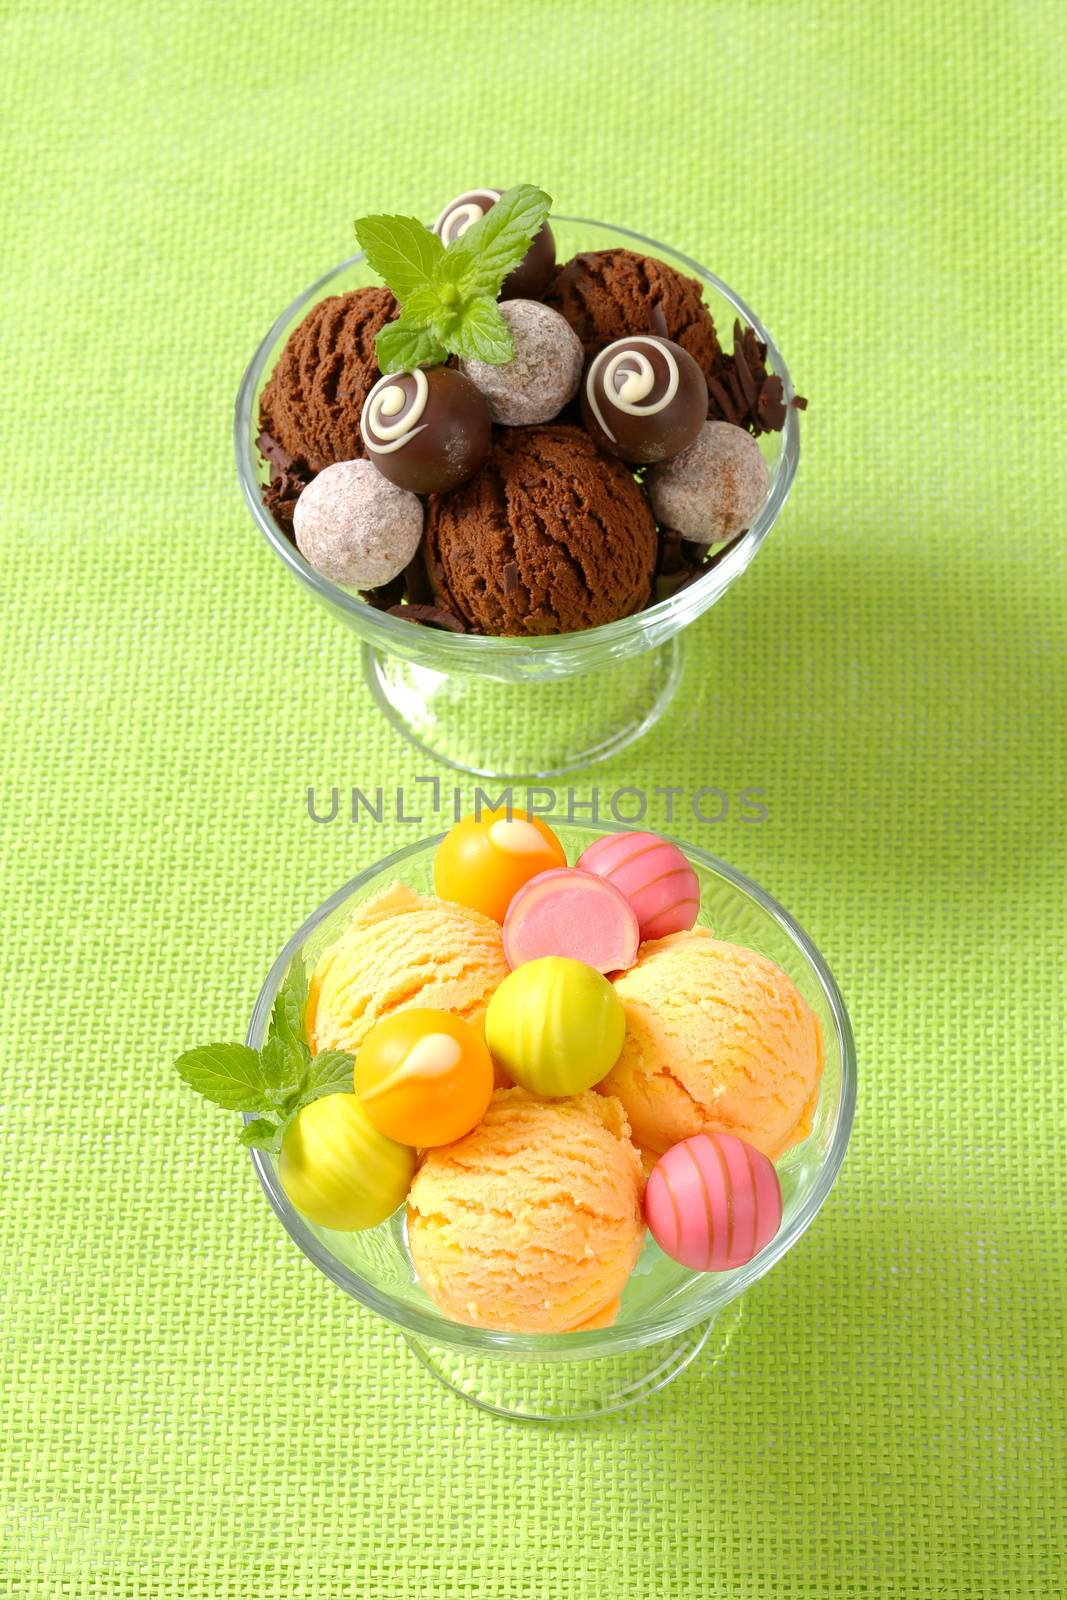 Two cups  of ice cream  with chocolate truffles and fruit-flavored pralines